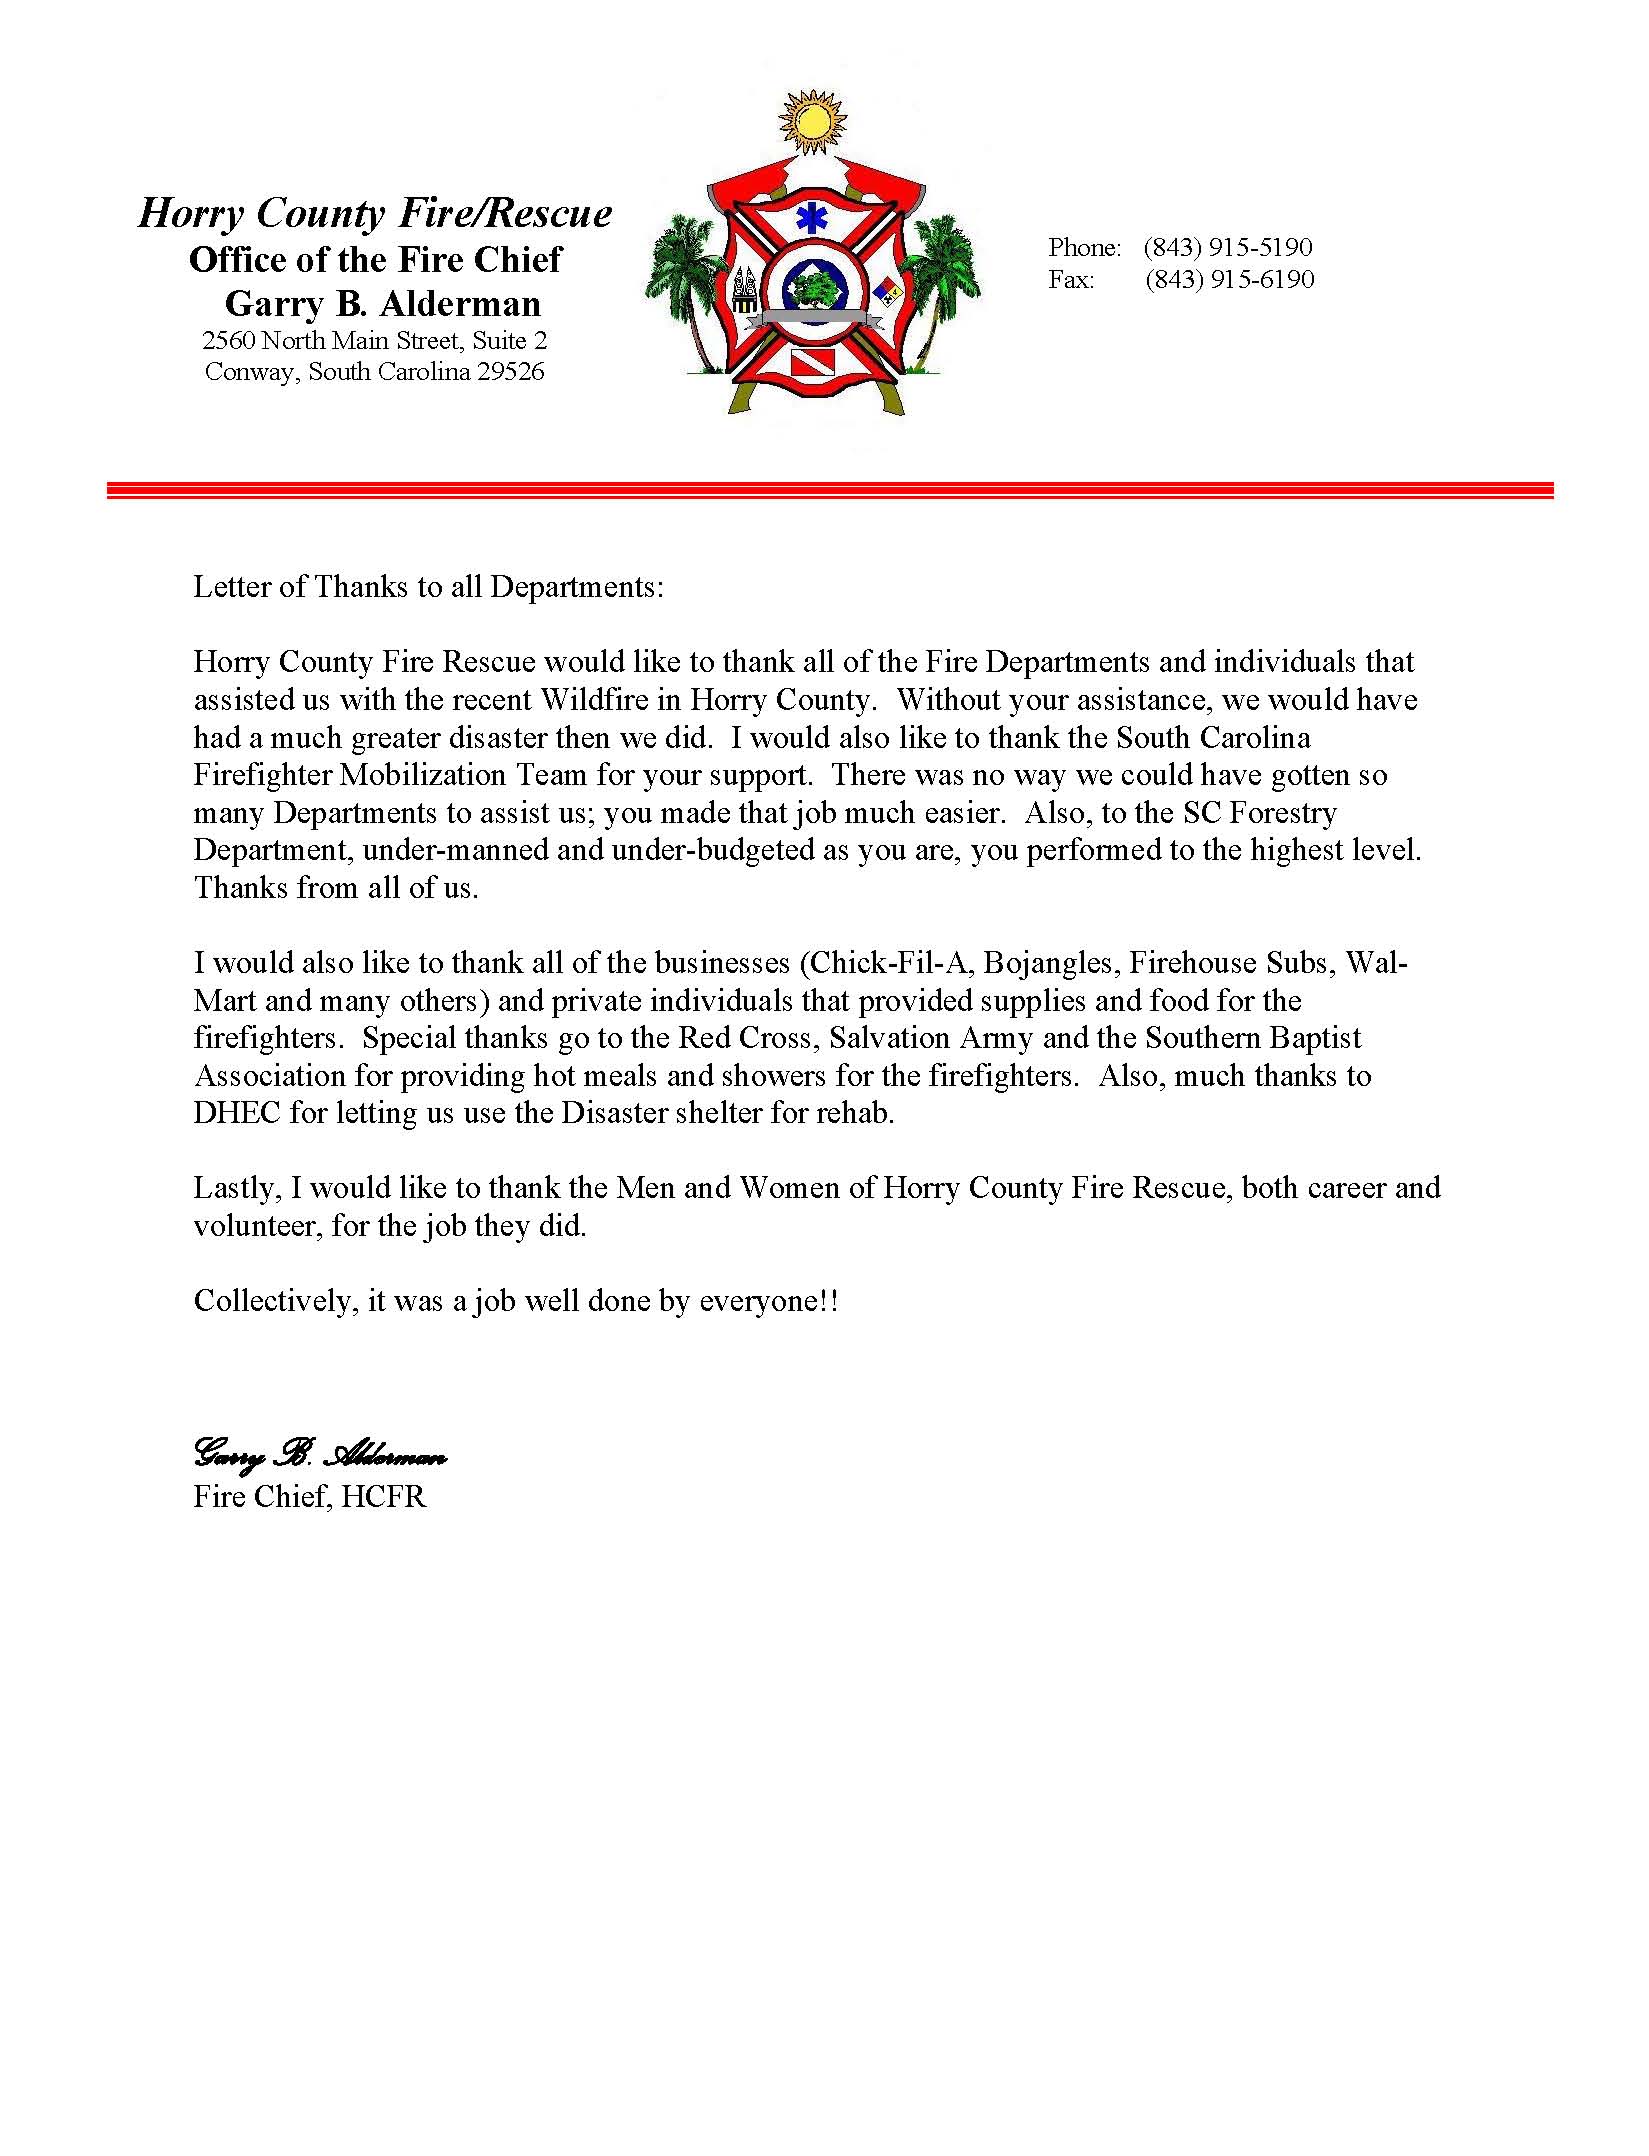 Sample Letter Of Appreciation For A Job Well Done from www.colletonfire.com